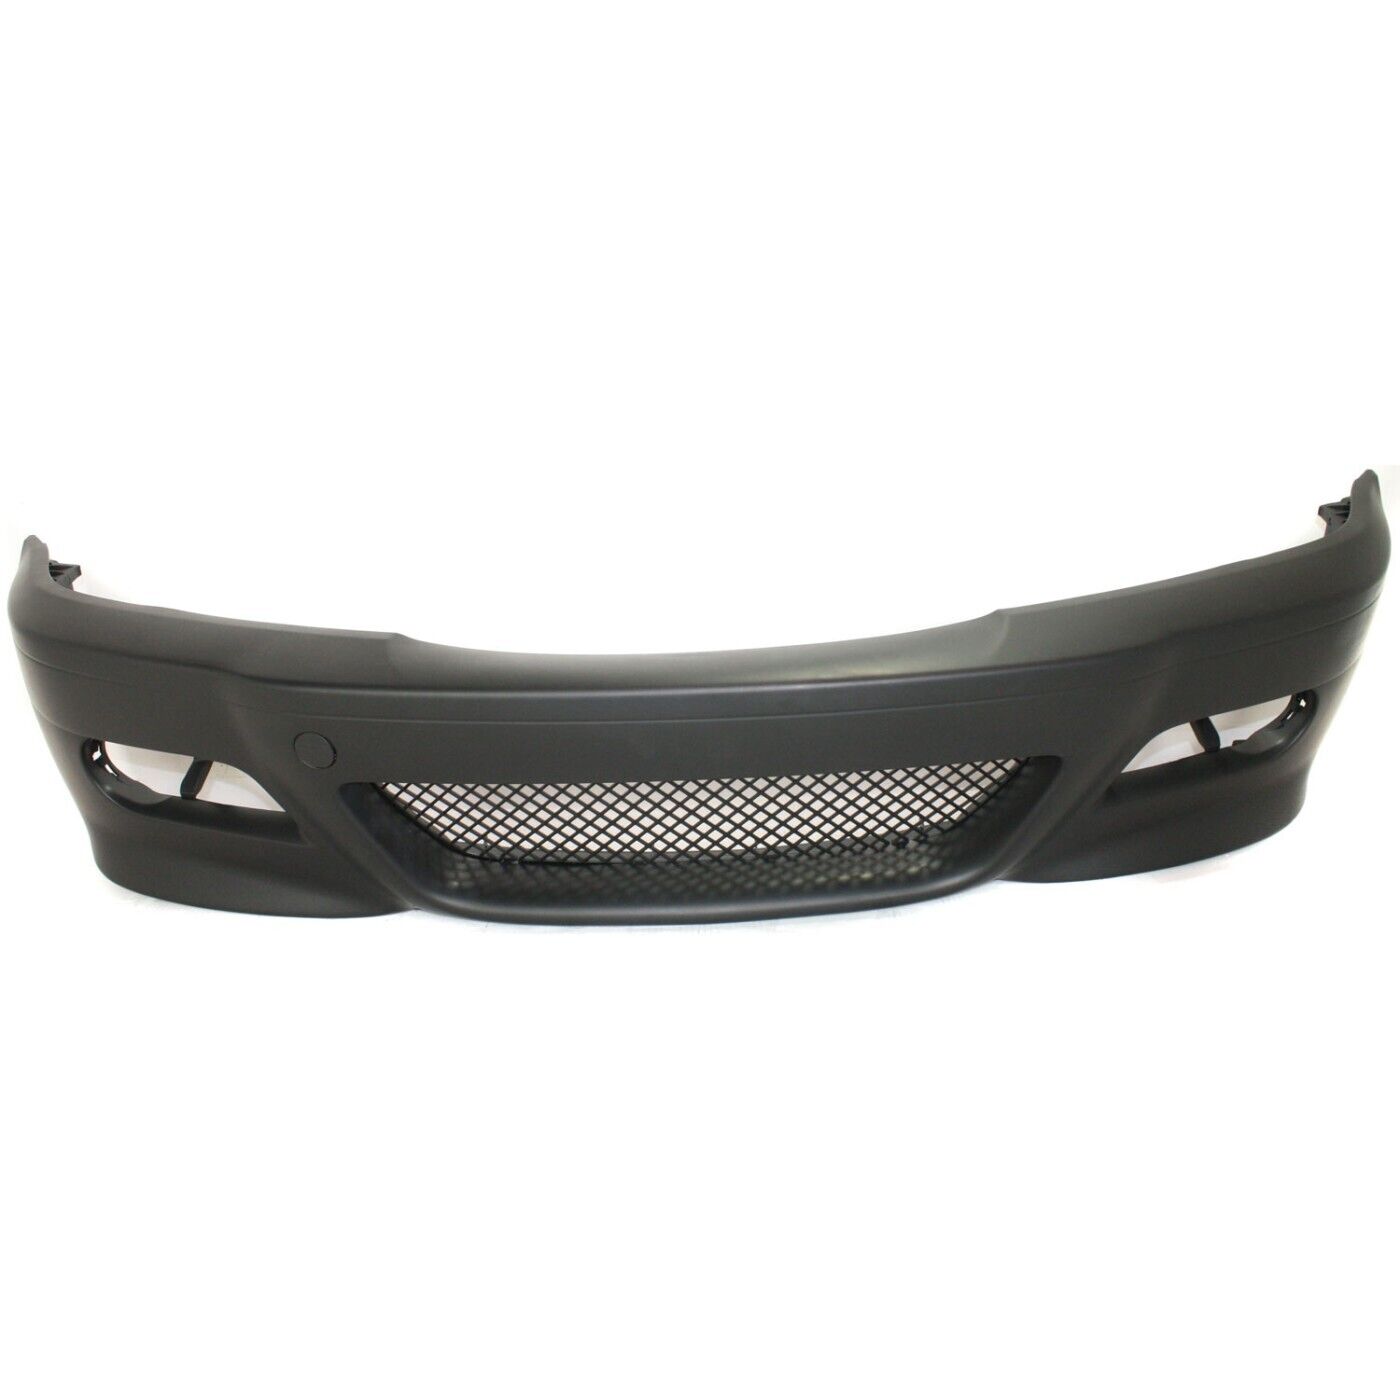 Bumper Cover For 2001-2005 BMW 325i Sedan Upgrade Look to M3 Style E46